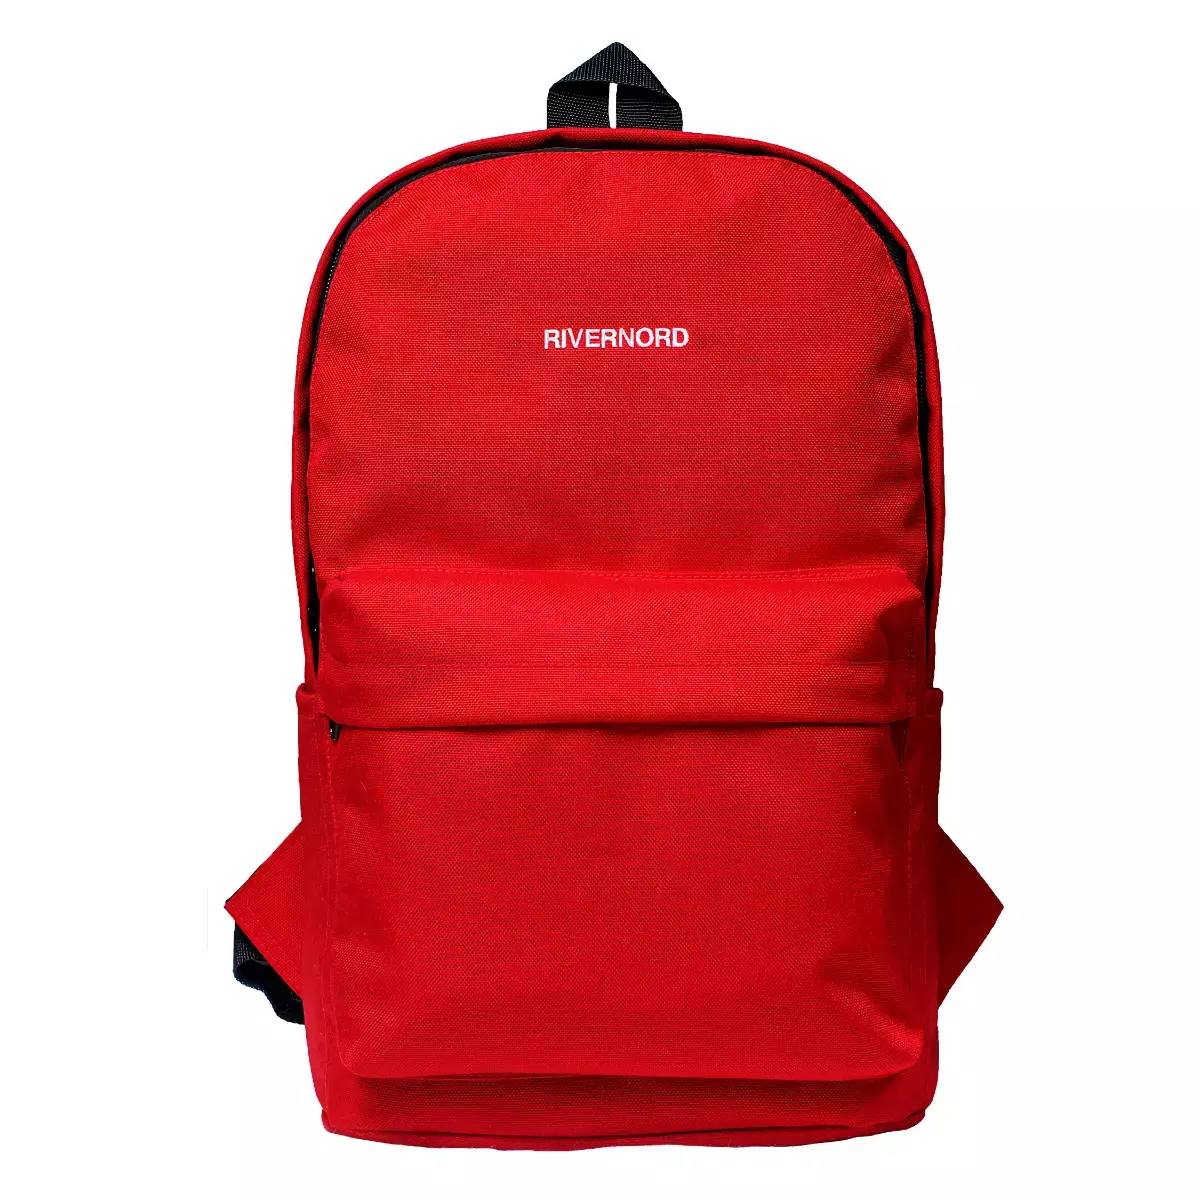 Backpacks and accessories